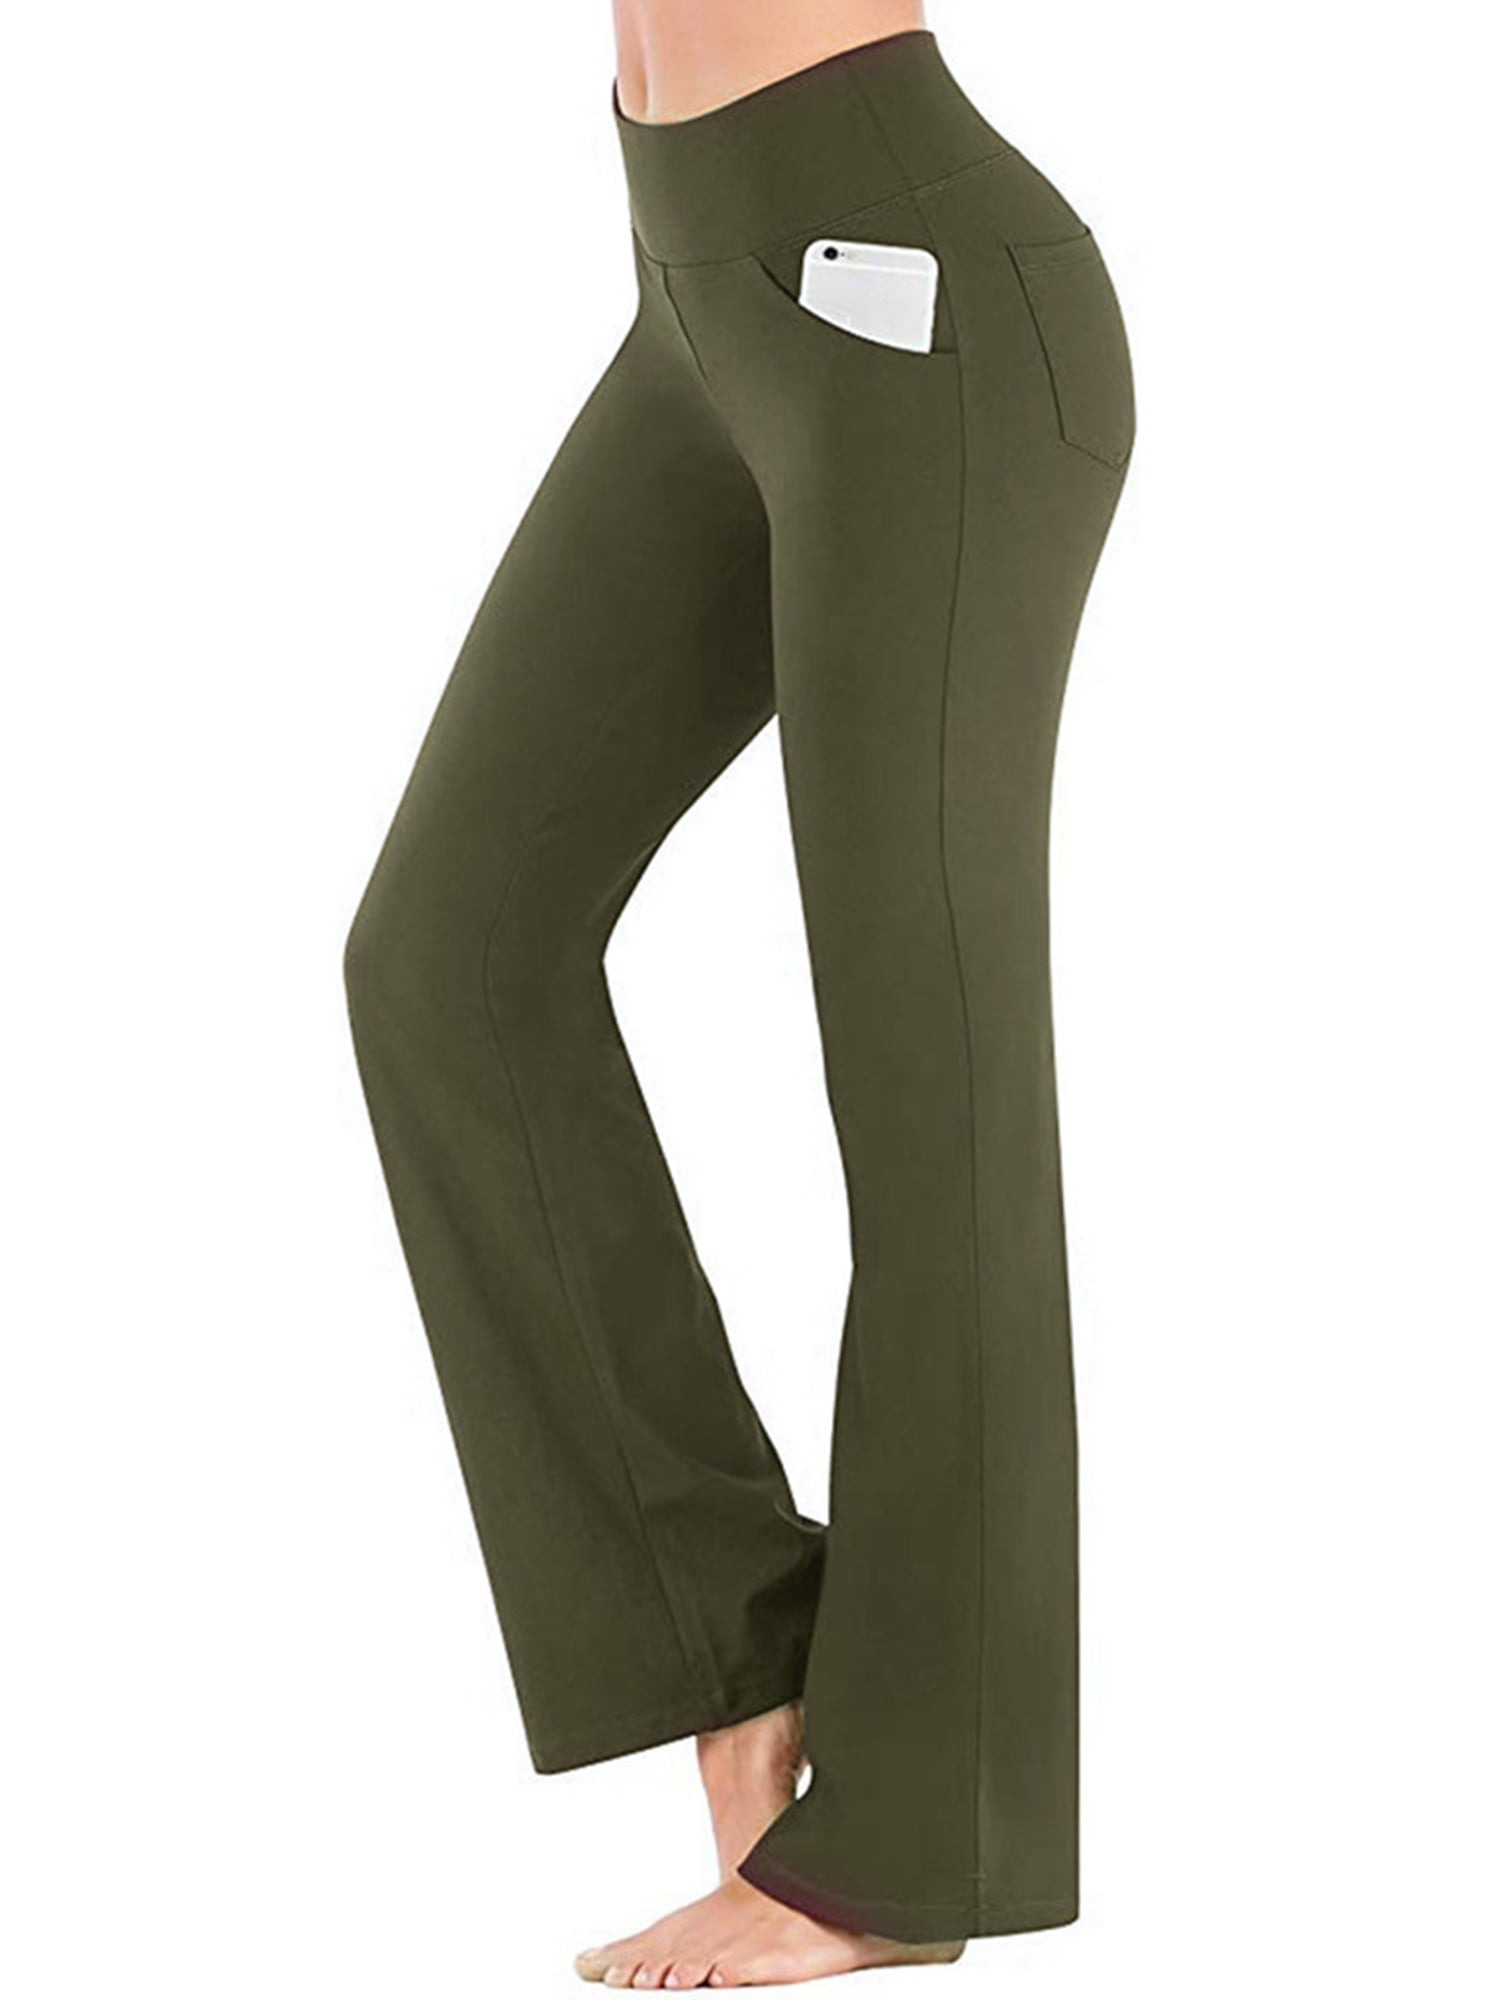 MOCOLY Bootcut Yoga Pants Tummy Control High Waist Workout Women Tall Bootleg Straight Long Flare Pants with 4 Pockets 